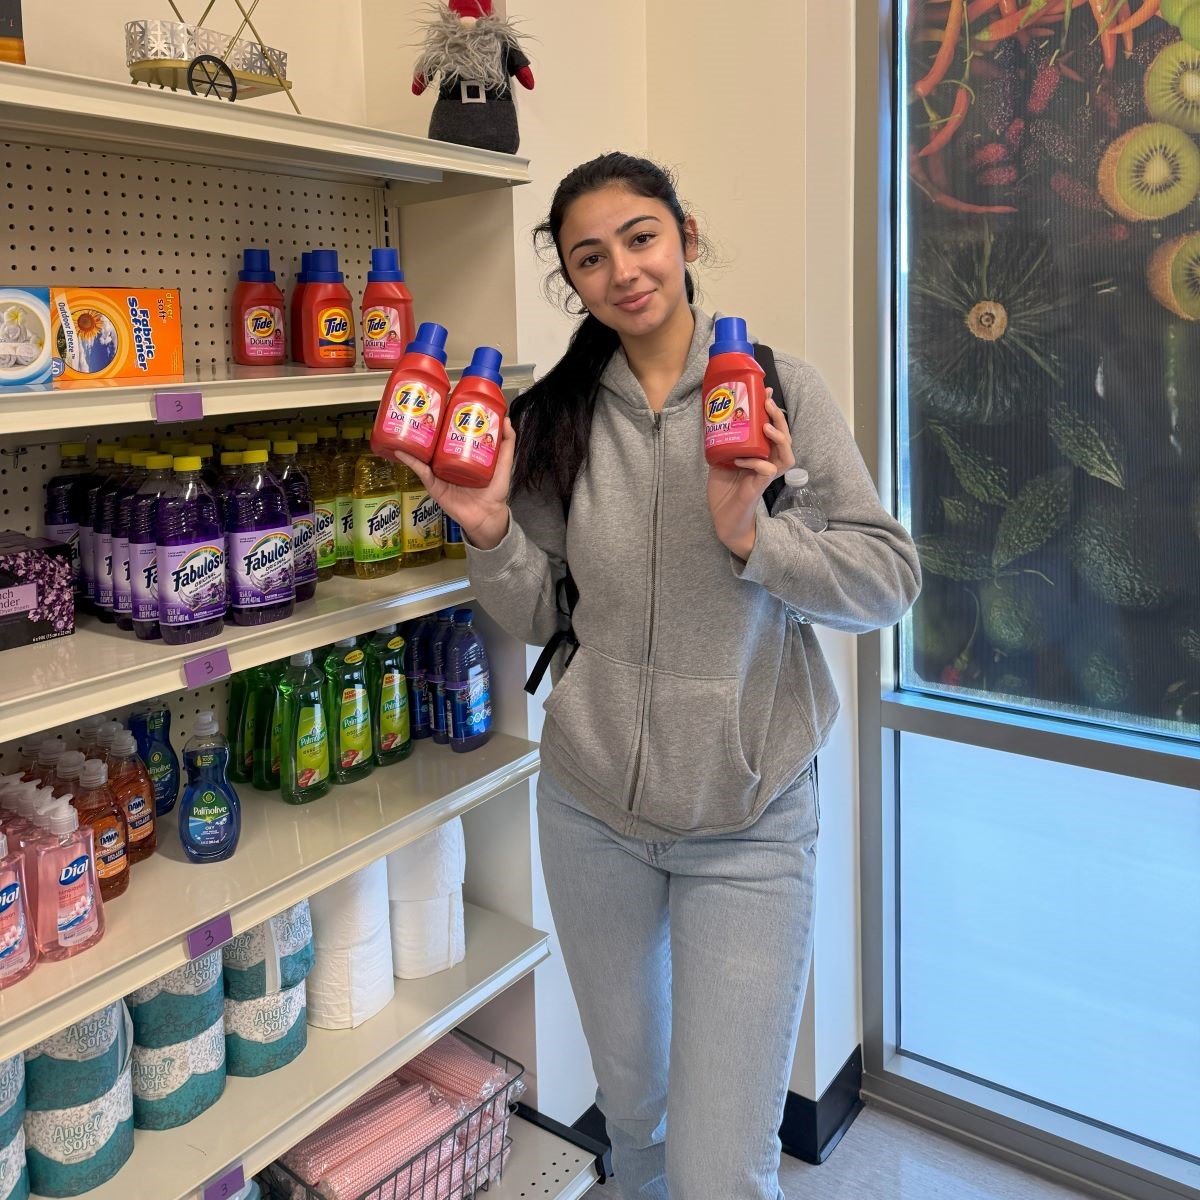 student in the mini market holding up laundry detergent